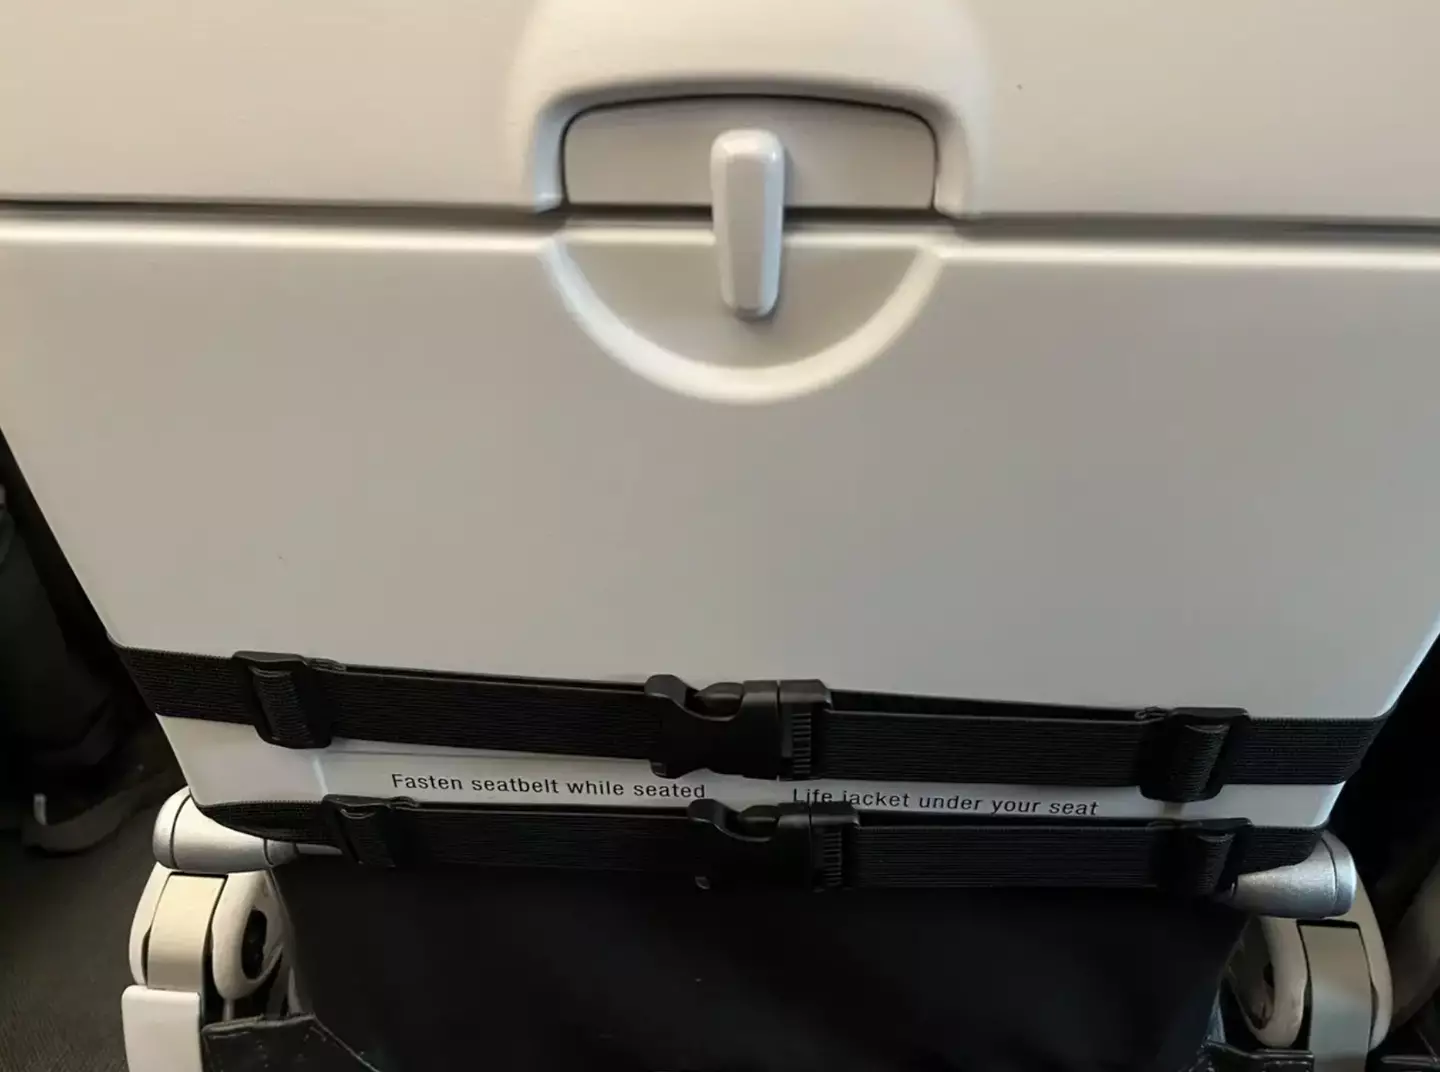 A plane passenger was left feeling ‘mildly furious’ after the person sitting in front of them attached a device to their seat.